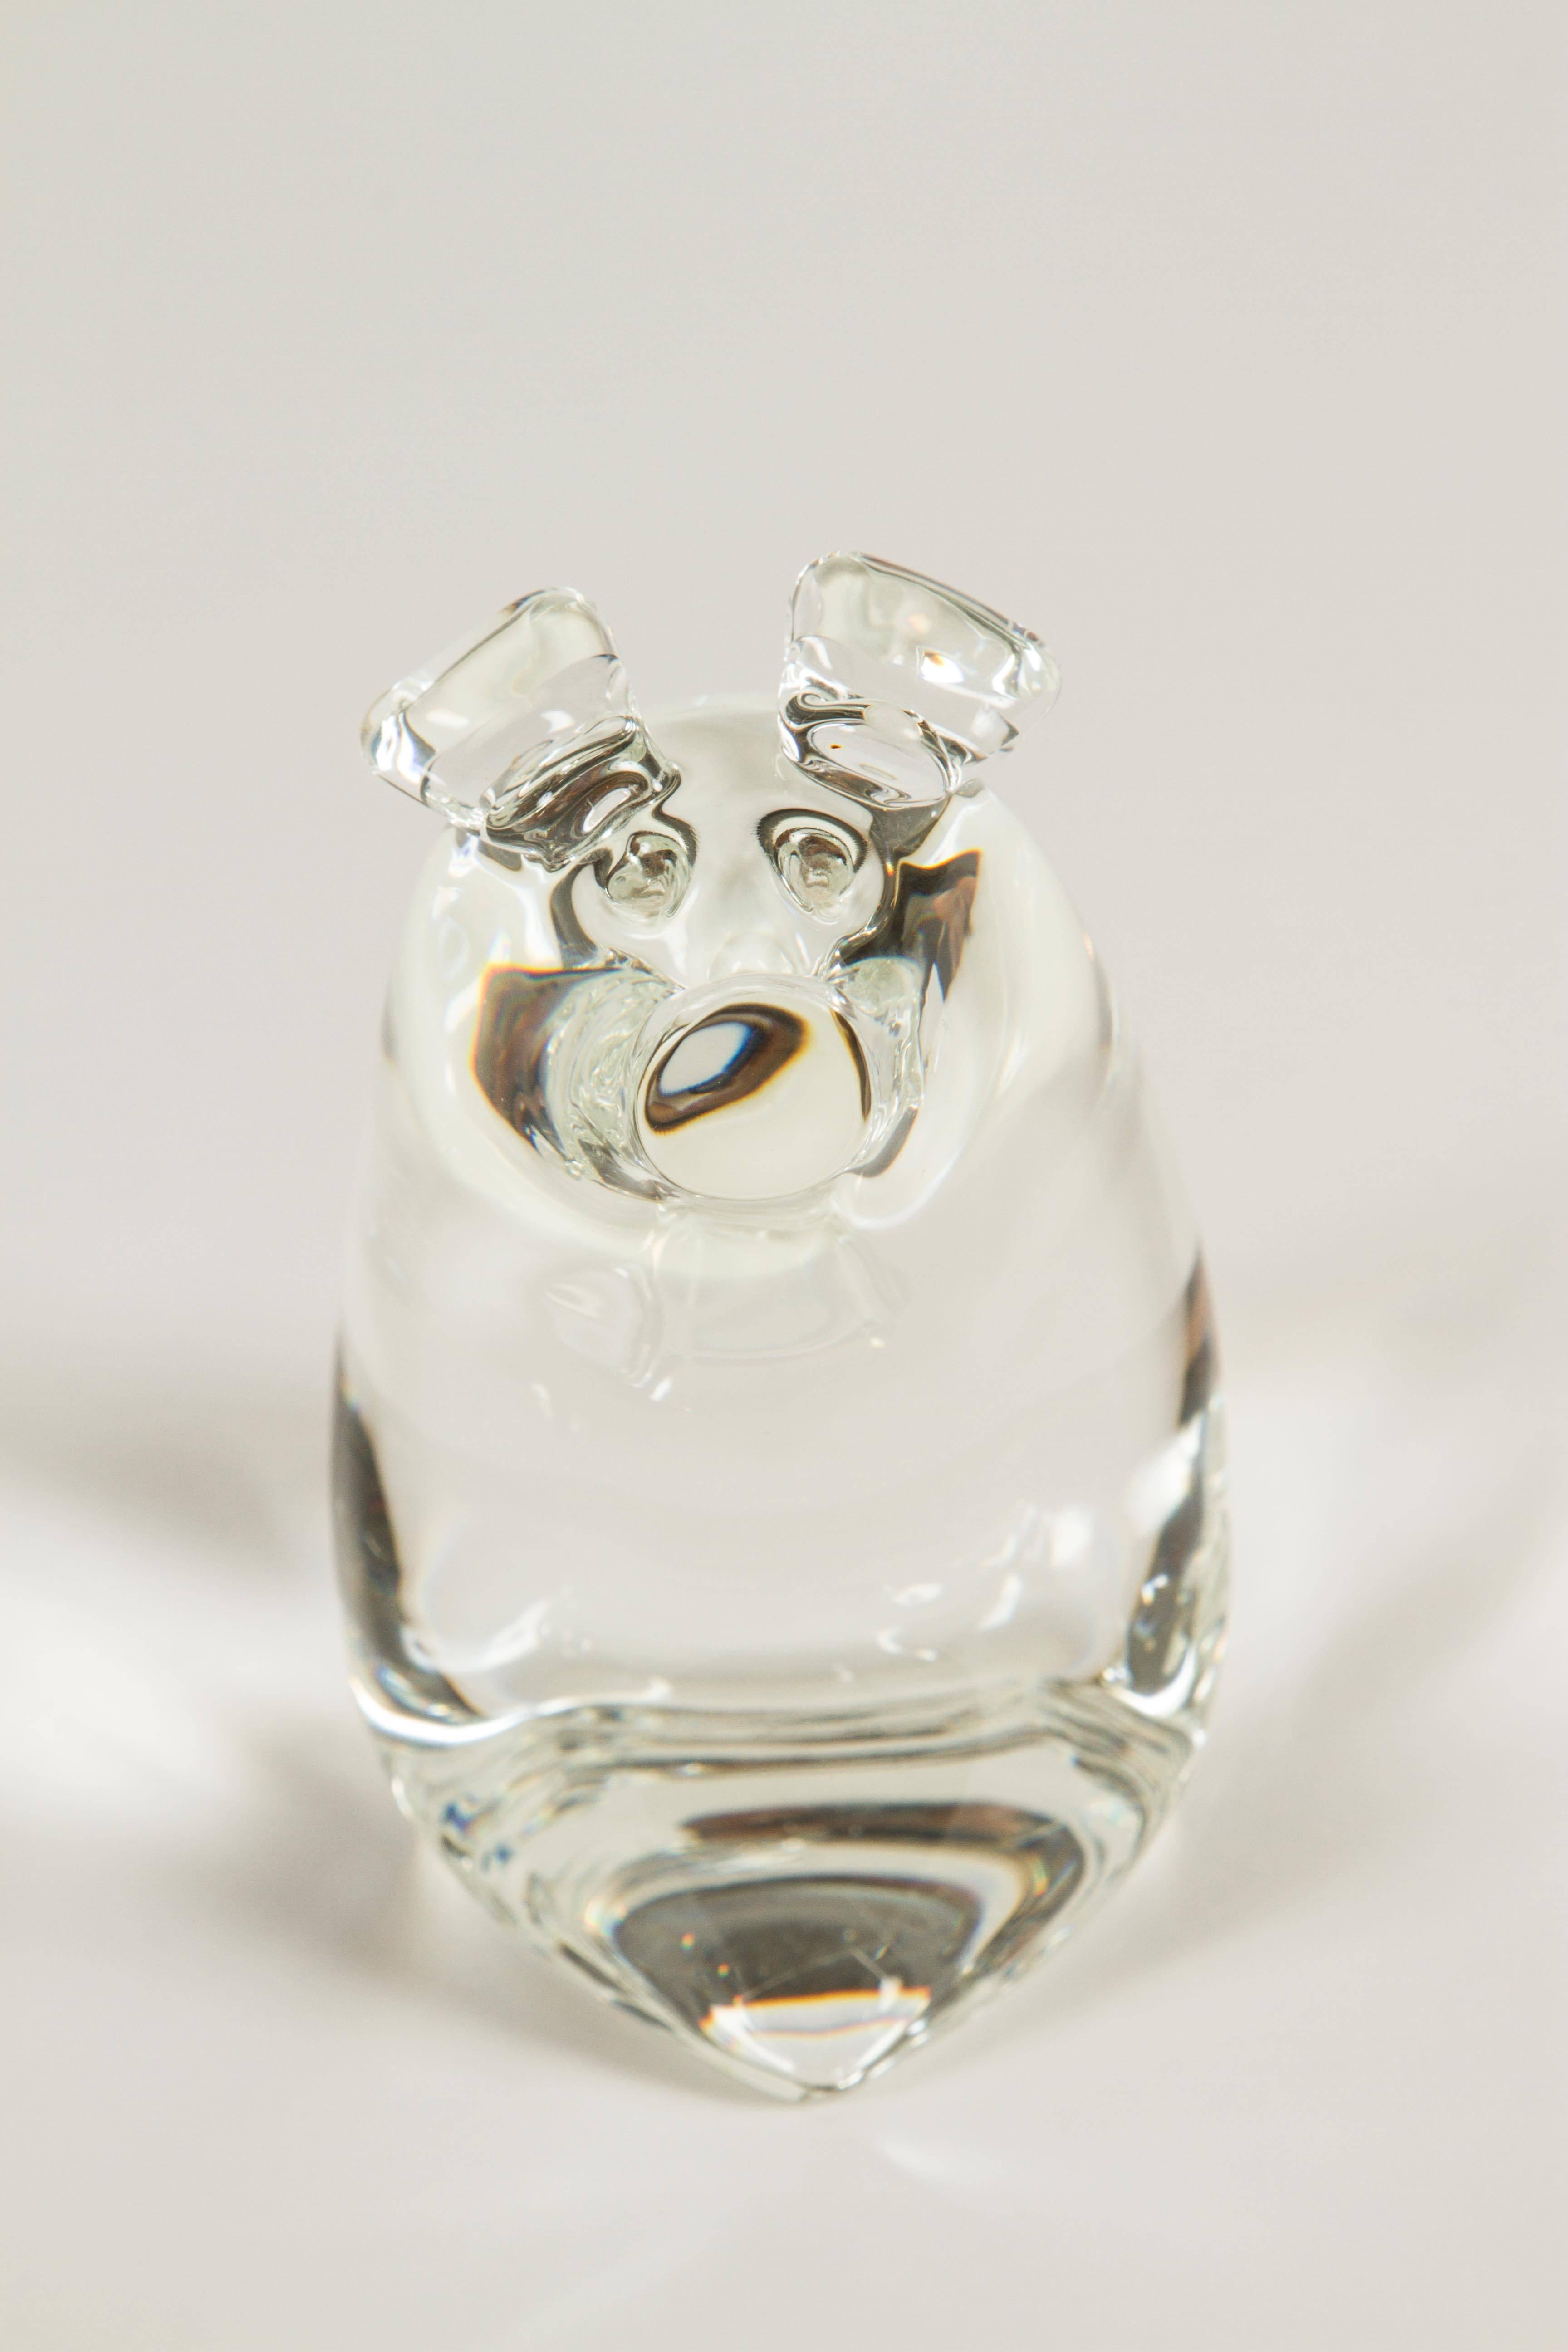 These adorable crystal pigs will bring a smile to your face! The two were designed and added to the Steuben menagerie in 1979.

Momma pig measures 5.5 H x 5.5 W x 3.75.

Baby pig measures 4.5 H x 4.5 W x 2.5
  
   